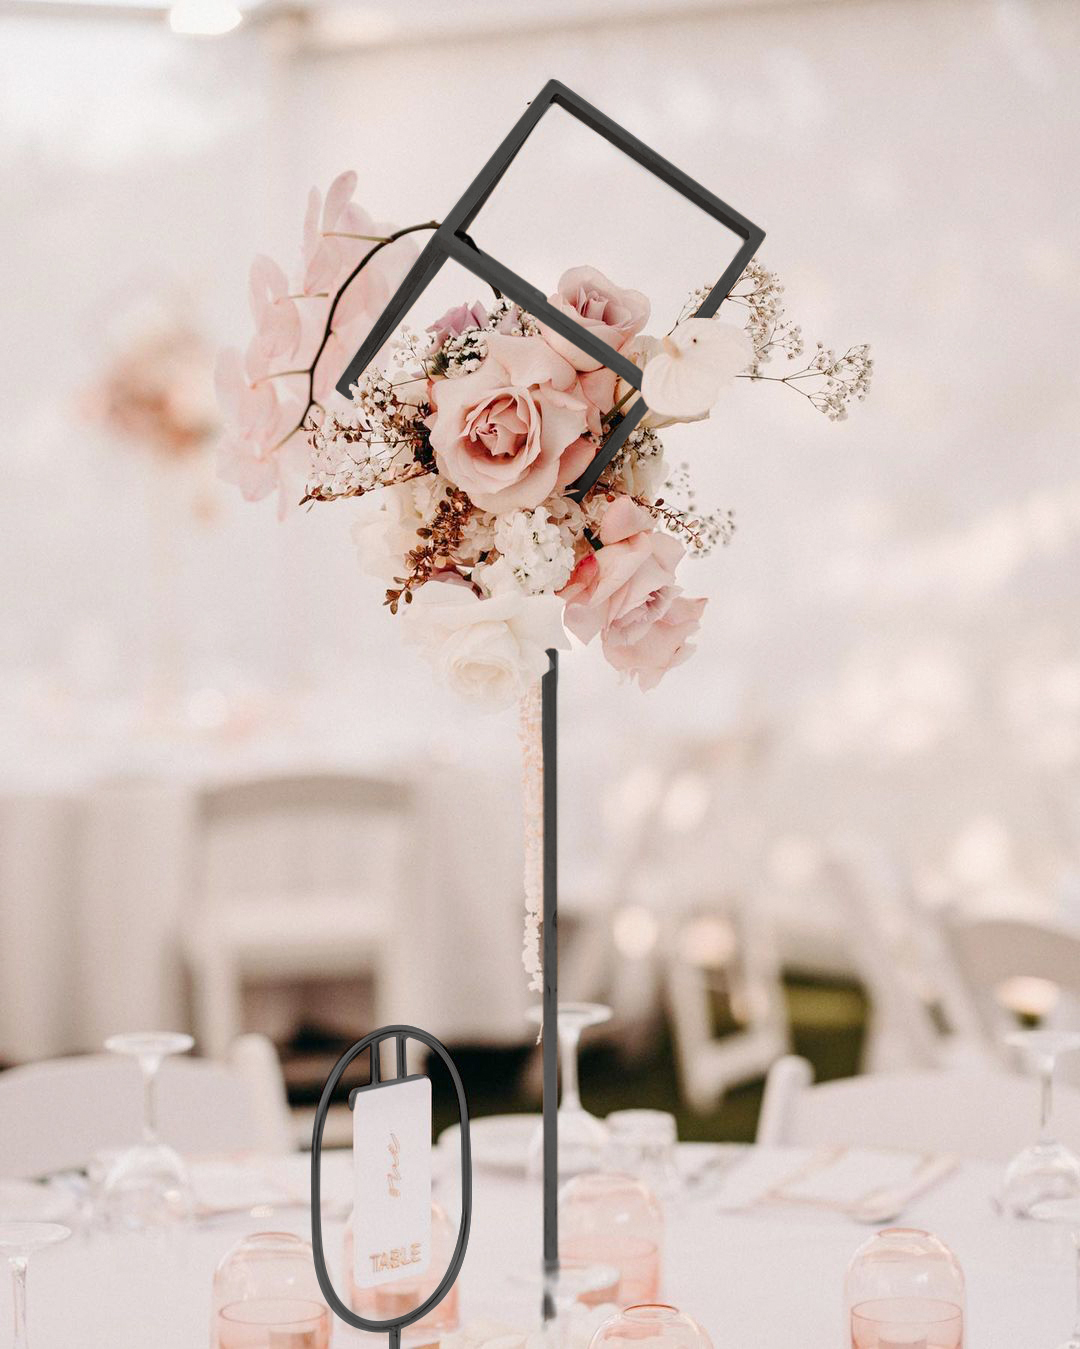 wedding flower stands for hire Perth <a href='#' class='view-taggged-products' data-id=6525>Click to View Products</a><div class='taggged-products-slider-wrap'><div class='heading-tag-products'></div><div class='taggged-products-slider'></div></div><div class='loading-spinner'><i class='fa fa-spinner fa-spin'></i></div>